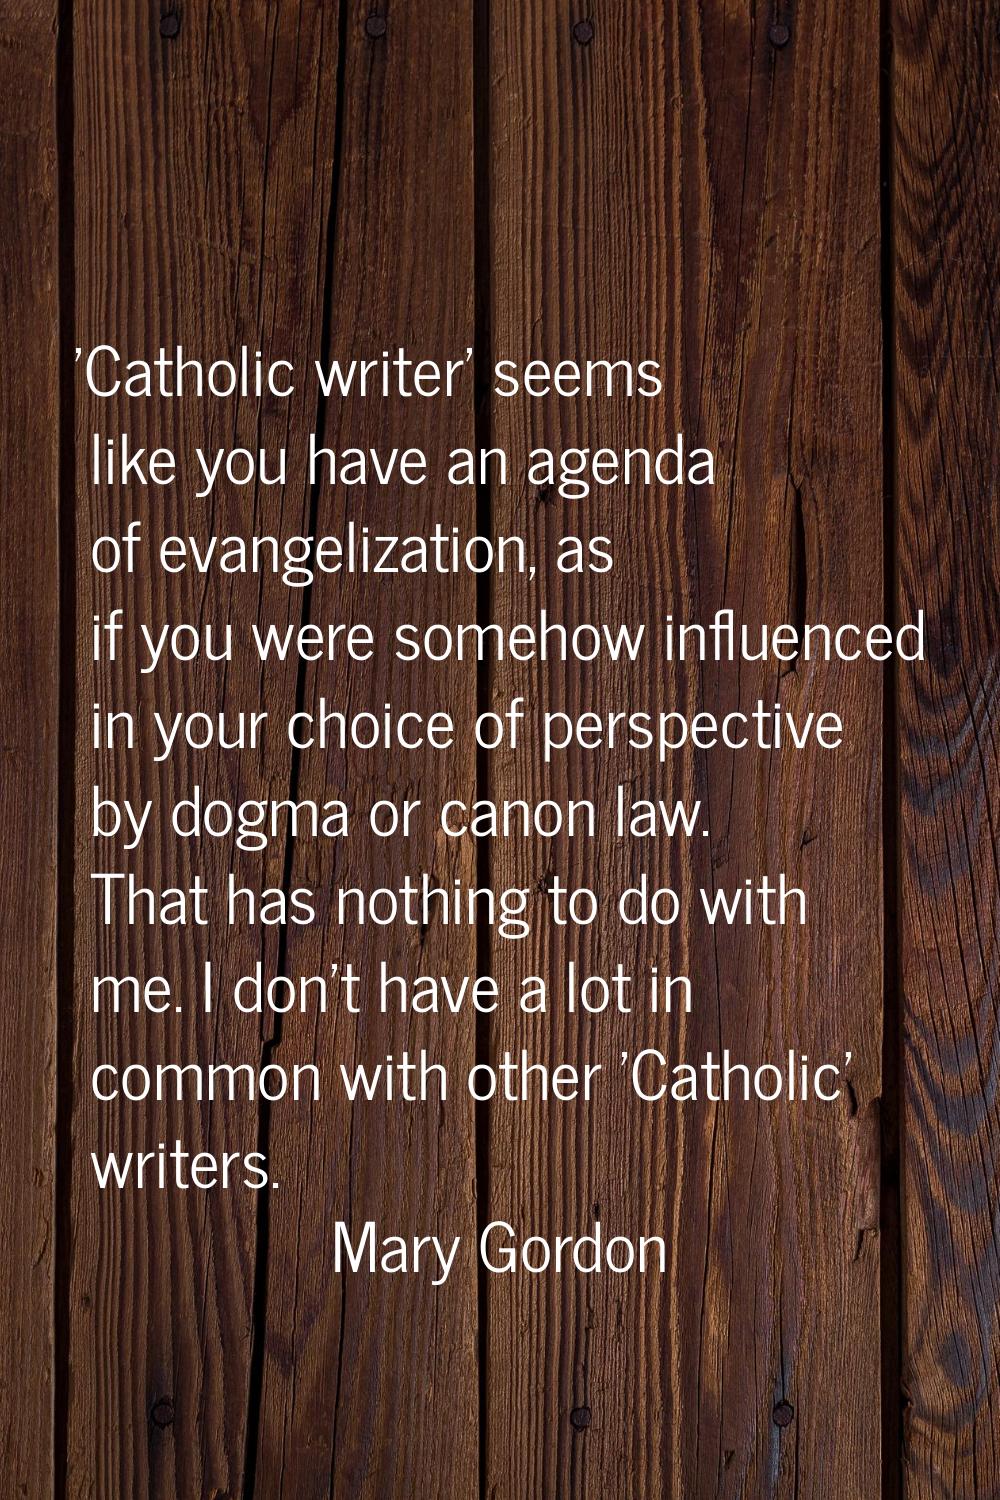 'Catholic writer' seems like you have an agenda of evangelization, as if you were somehow influence